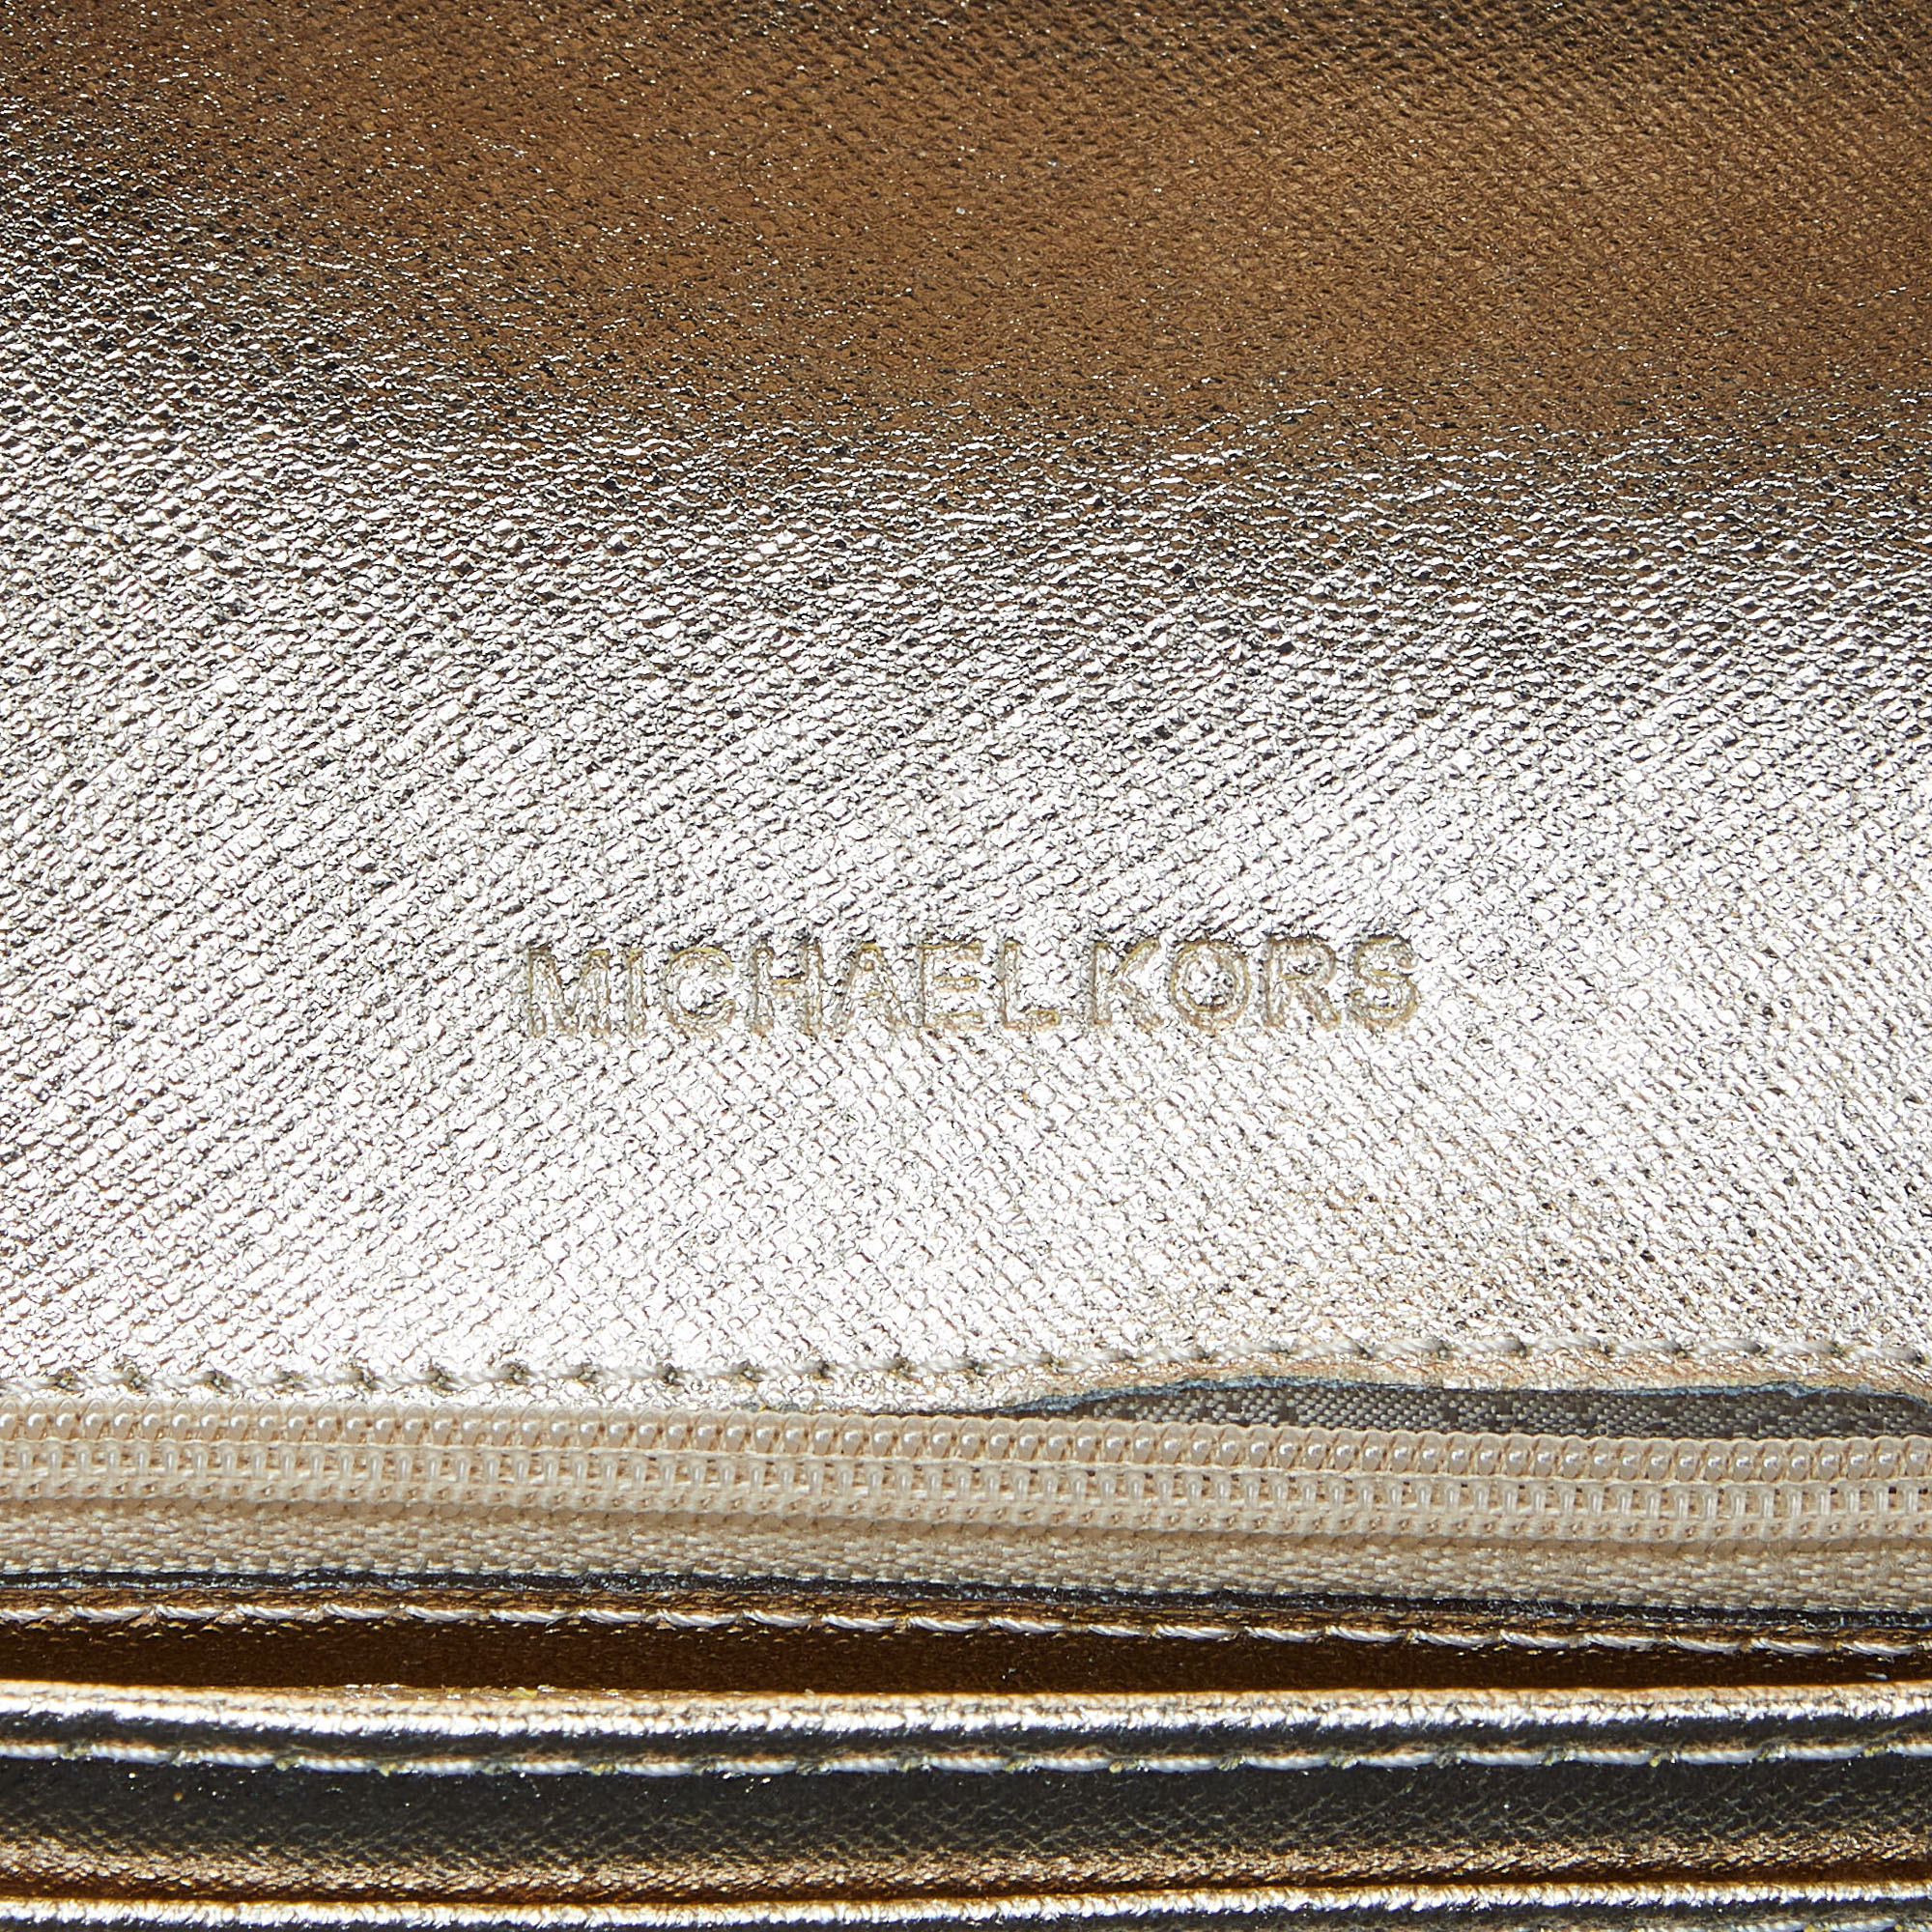 Michael Kors Gold Leather Jet Set Travel Wallet On Chain